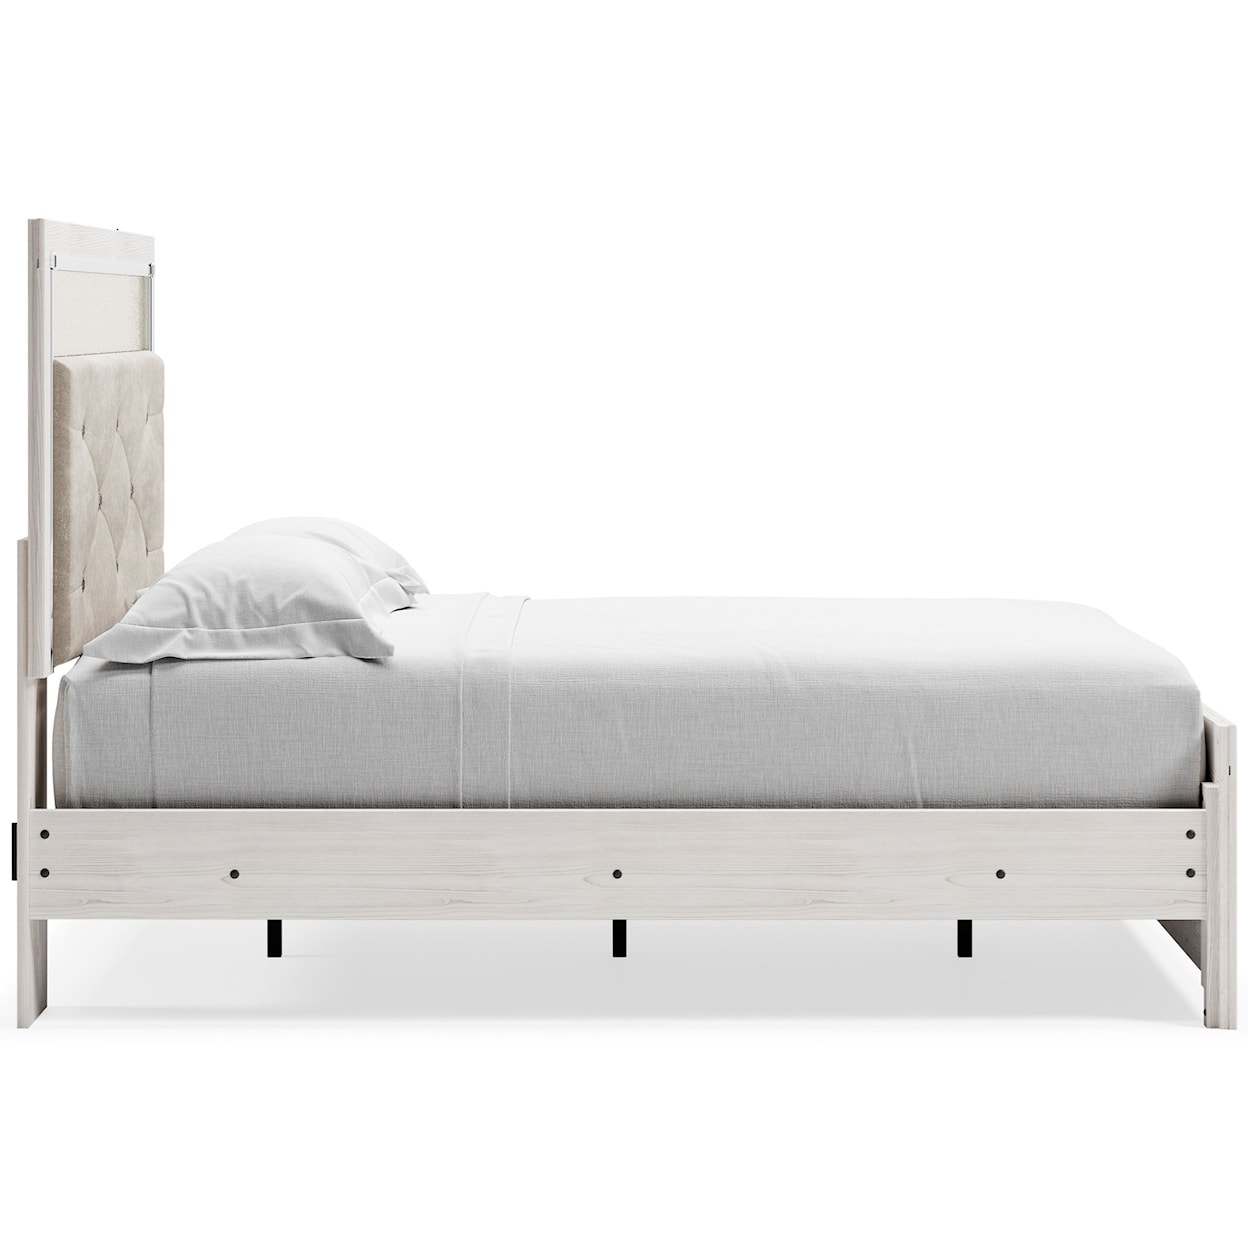 Signature Design by Ashley Altyra Full Upholstered Panel Bed